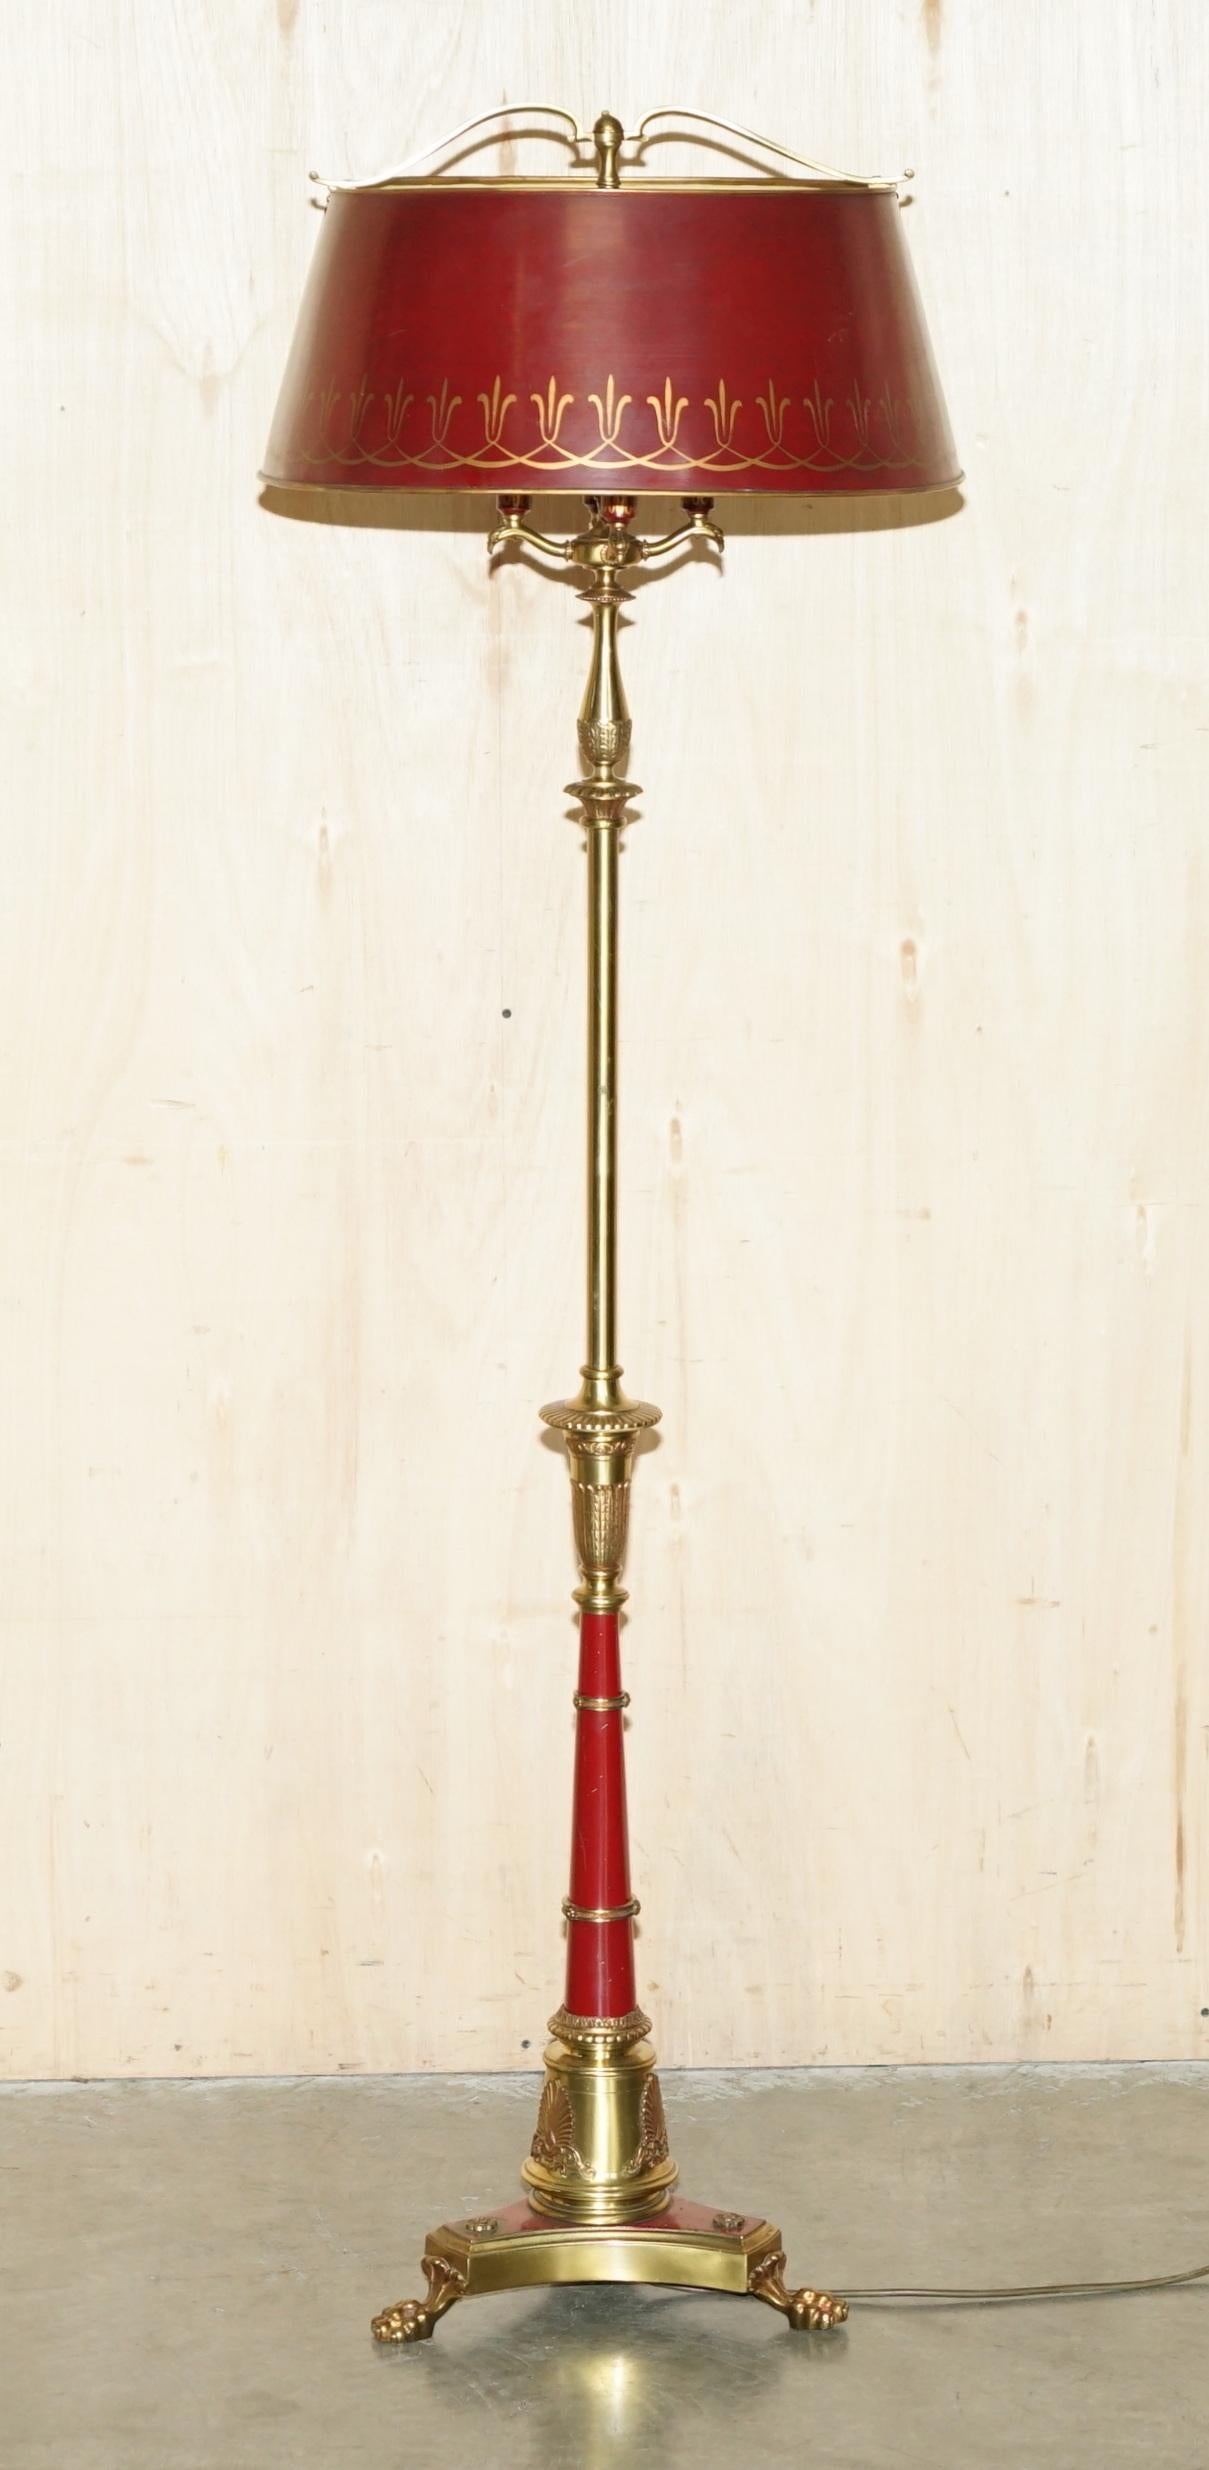 We are delighted to offer for sale this lovely handmade in France circa 1930 brass and hand painted floor standing lamp of very fine order with Lion's hairy paw feet

A super decorative and beautifully made floor standing lamp, made in the French